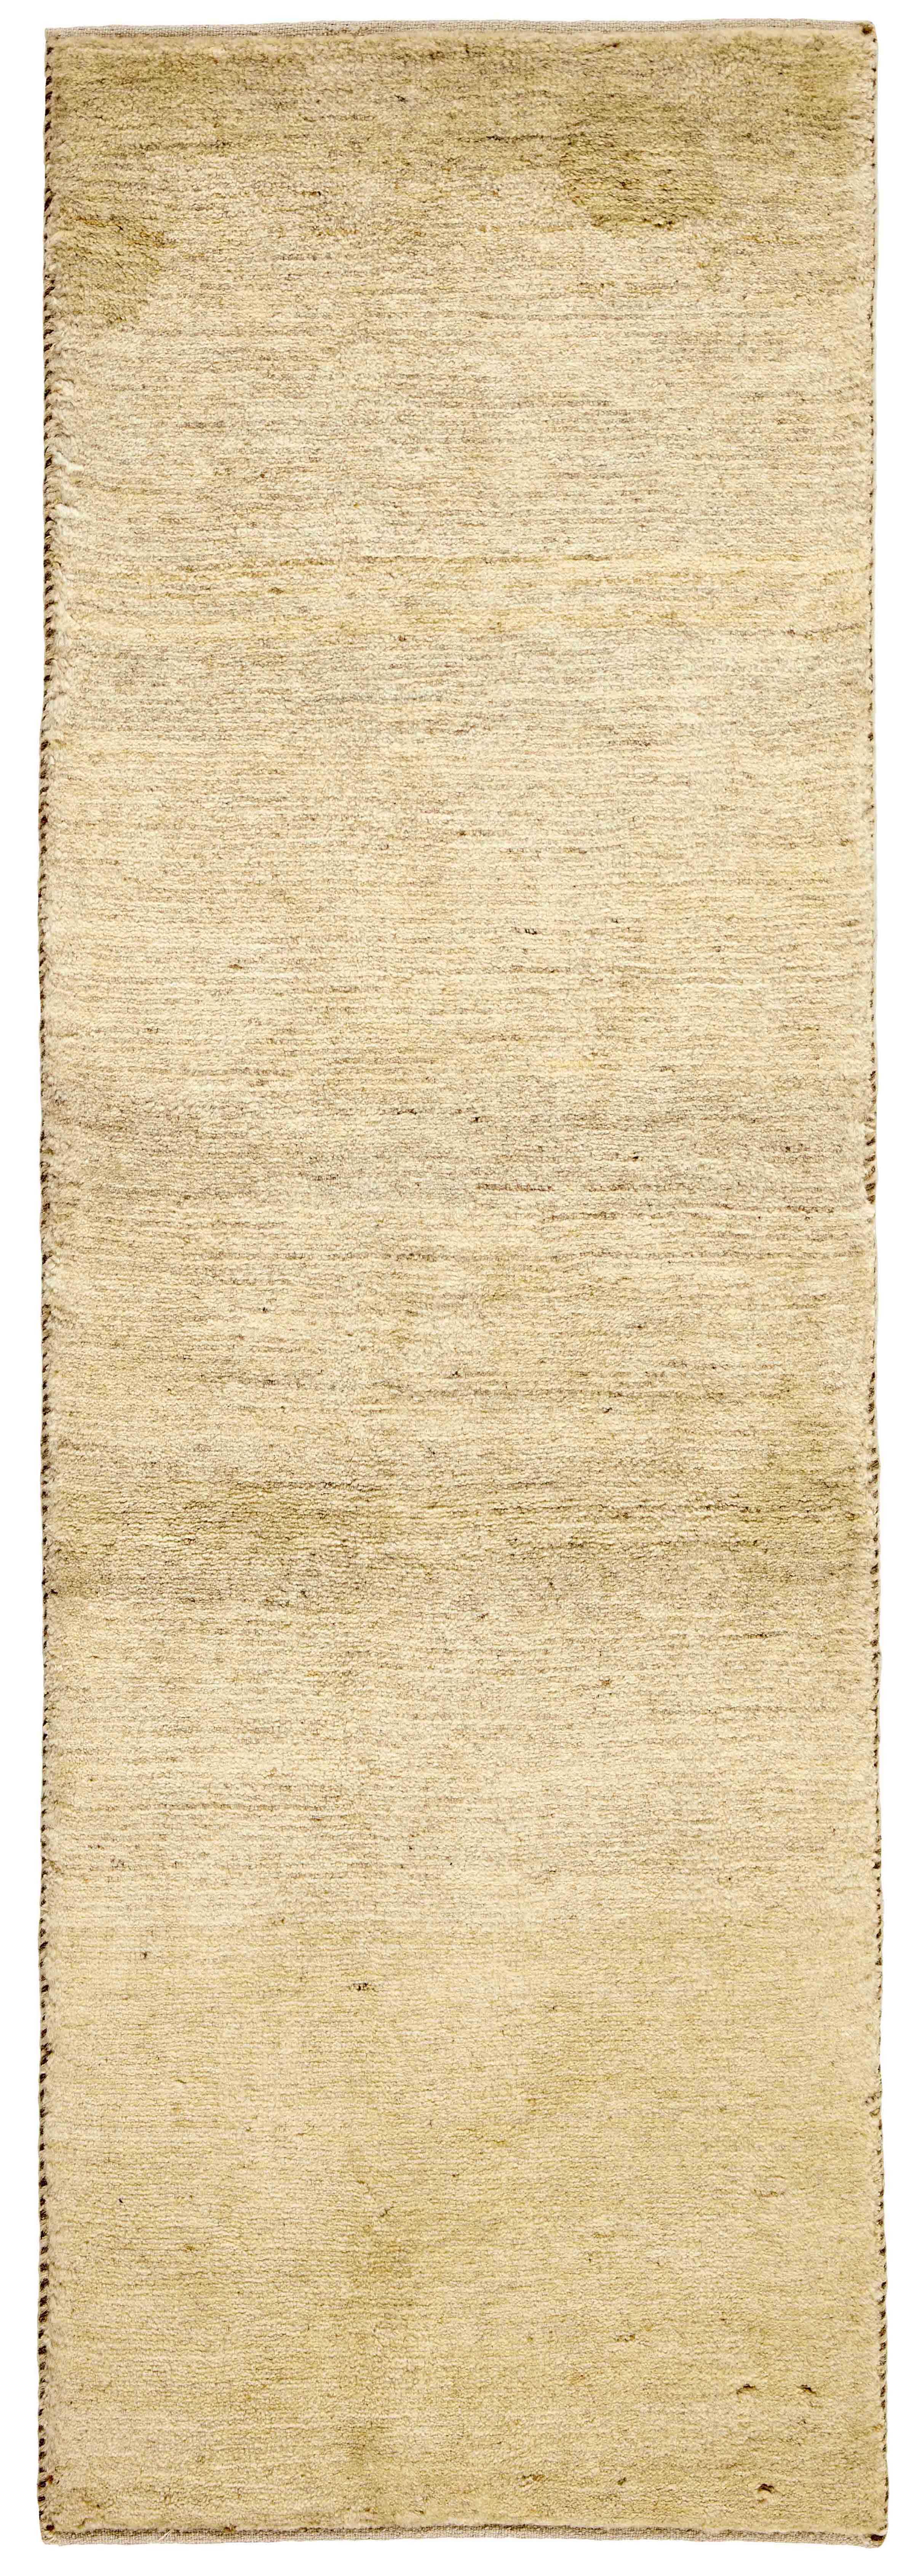 Authentic Persian wool rug with plain design in beige